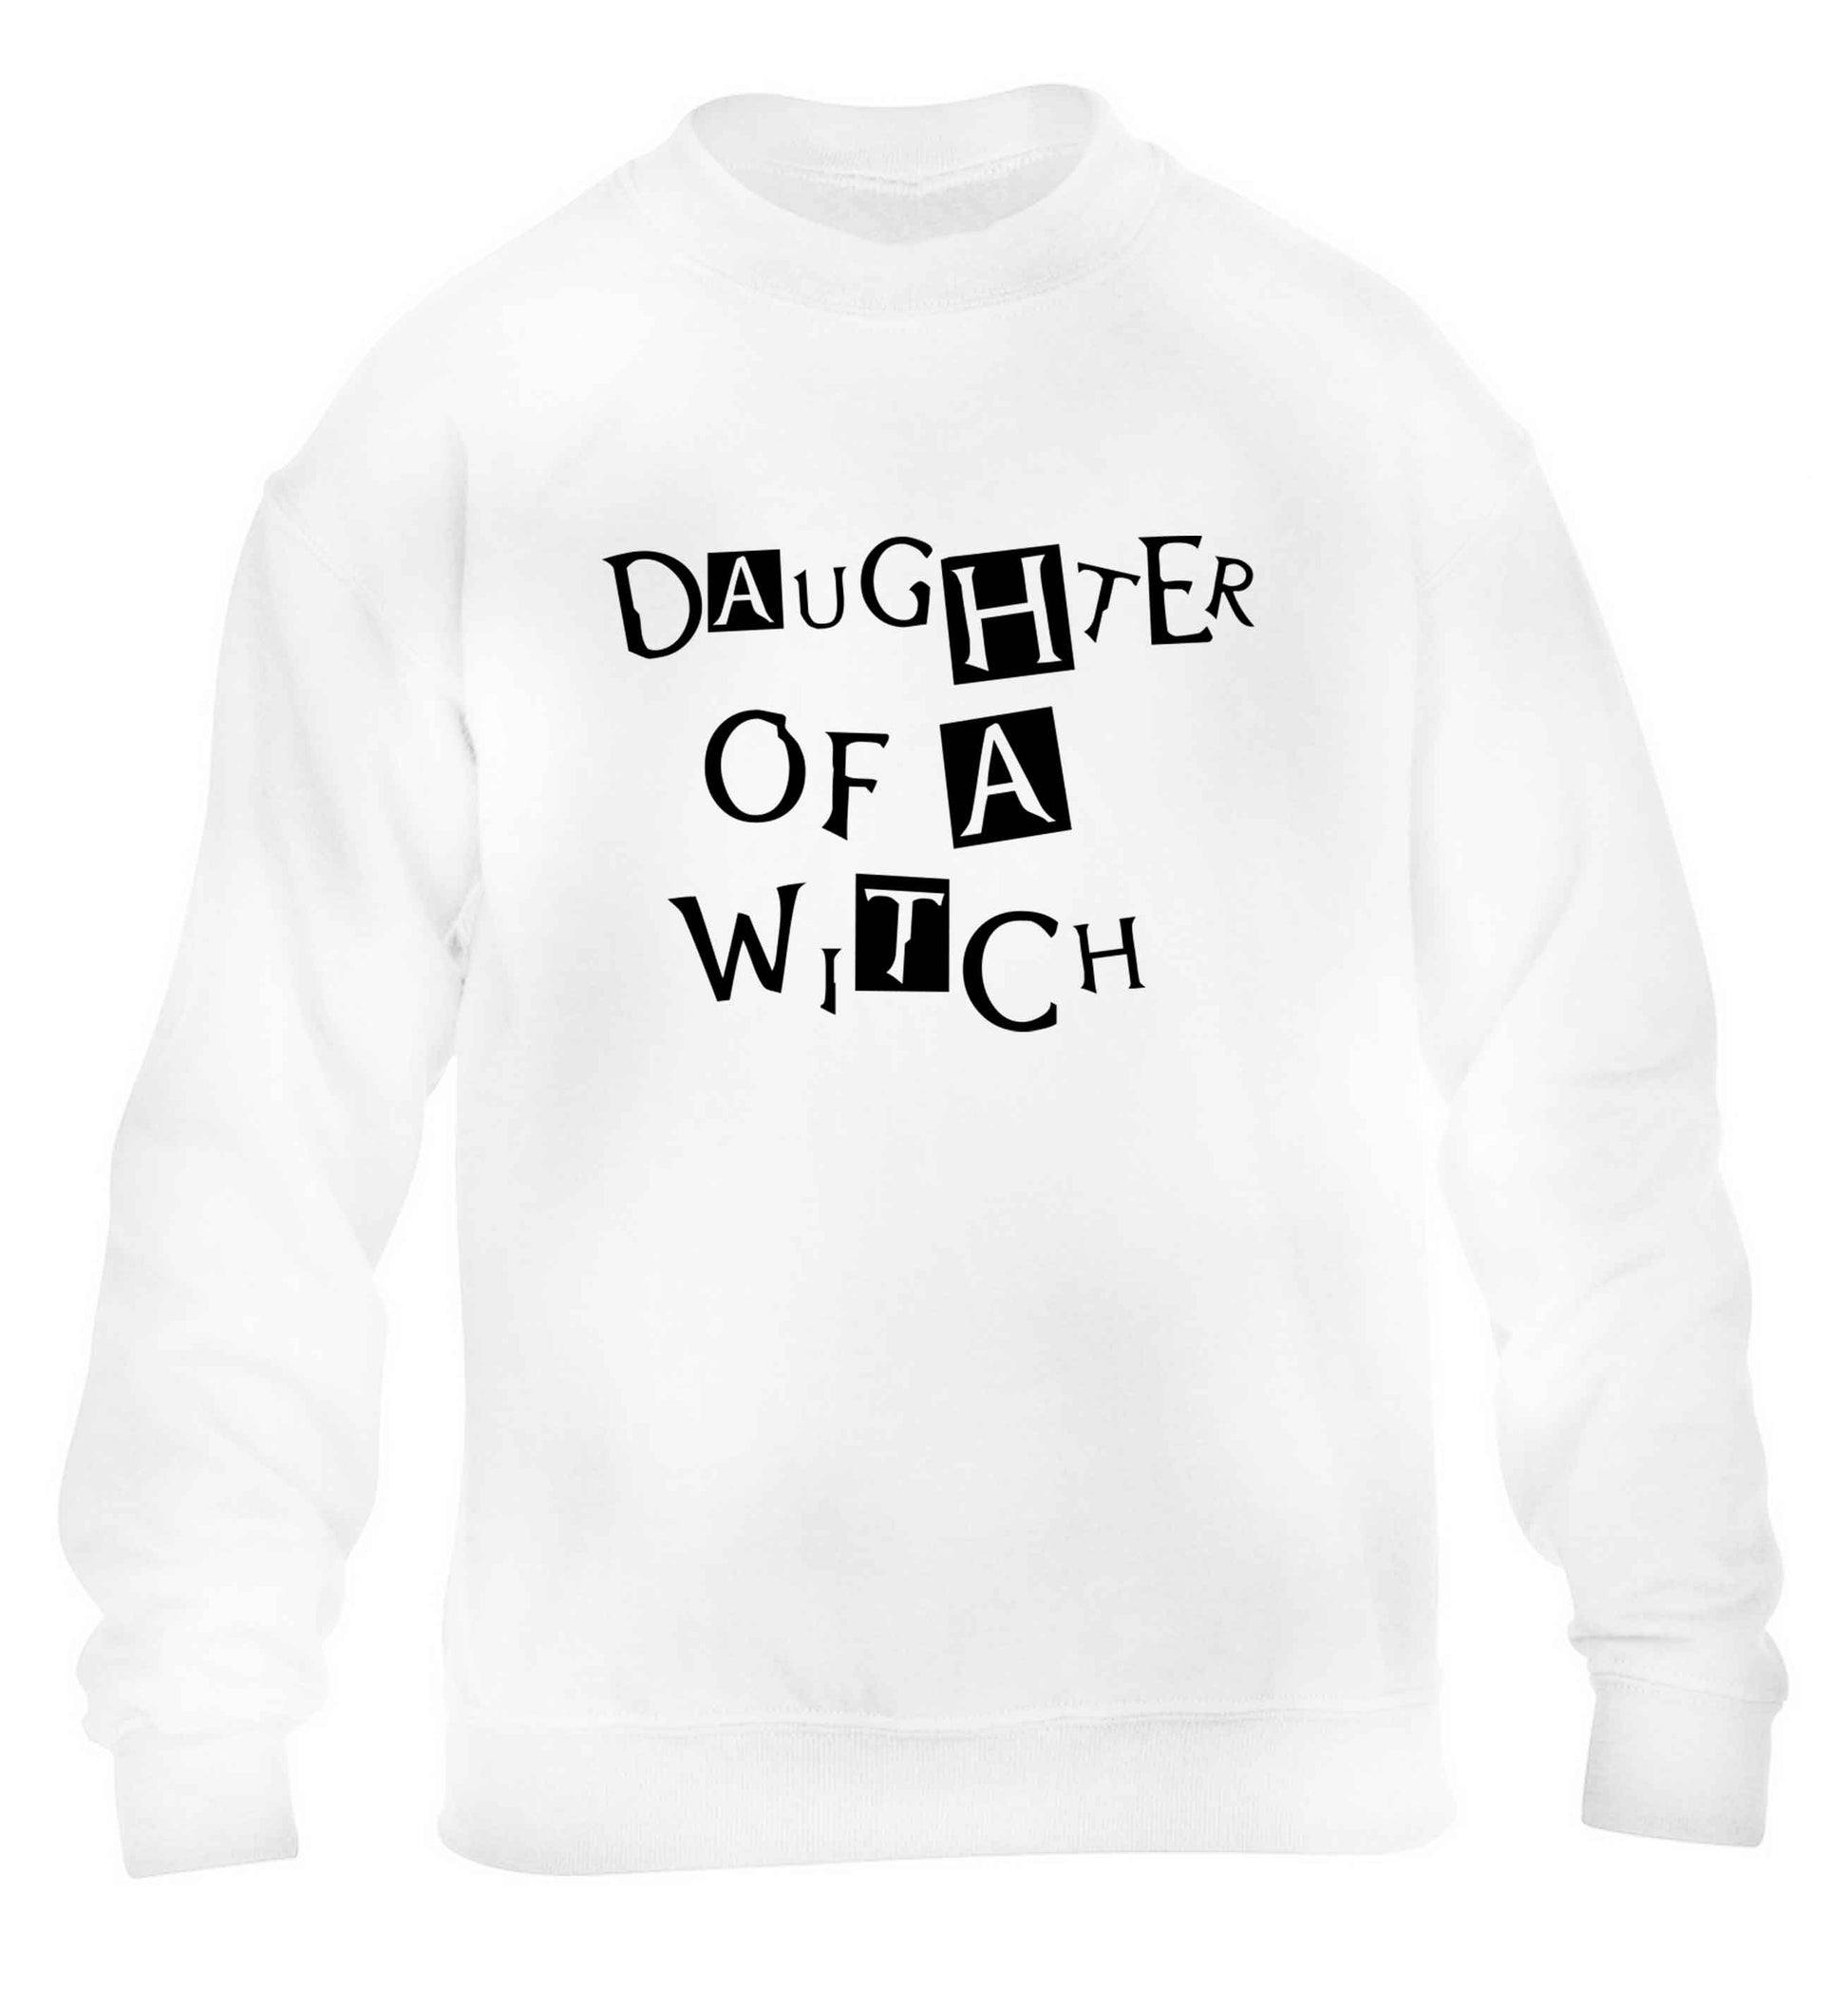 Daughter of a witch children's white sweater 12-13 Years